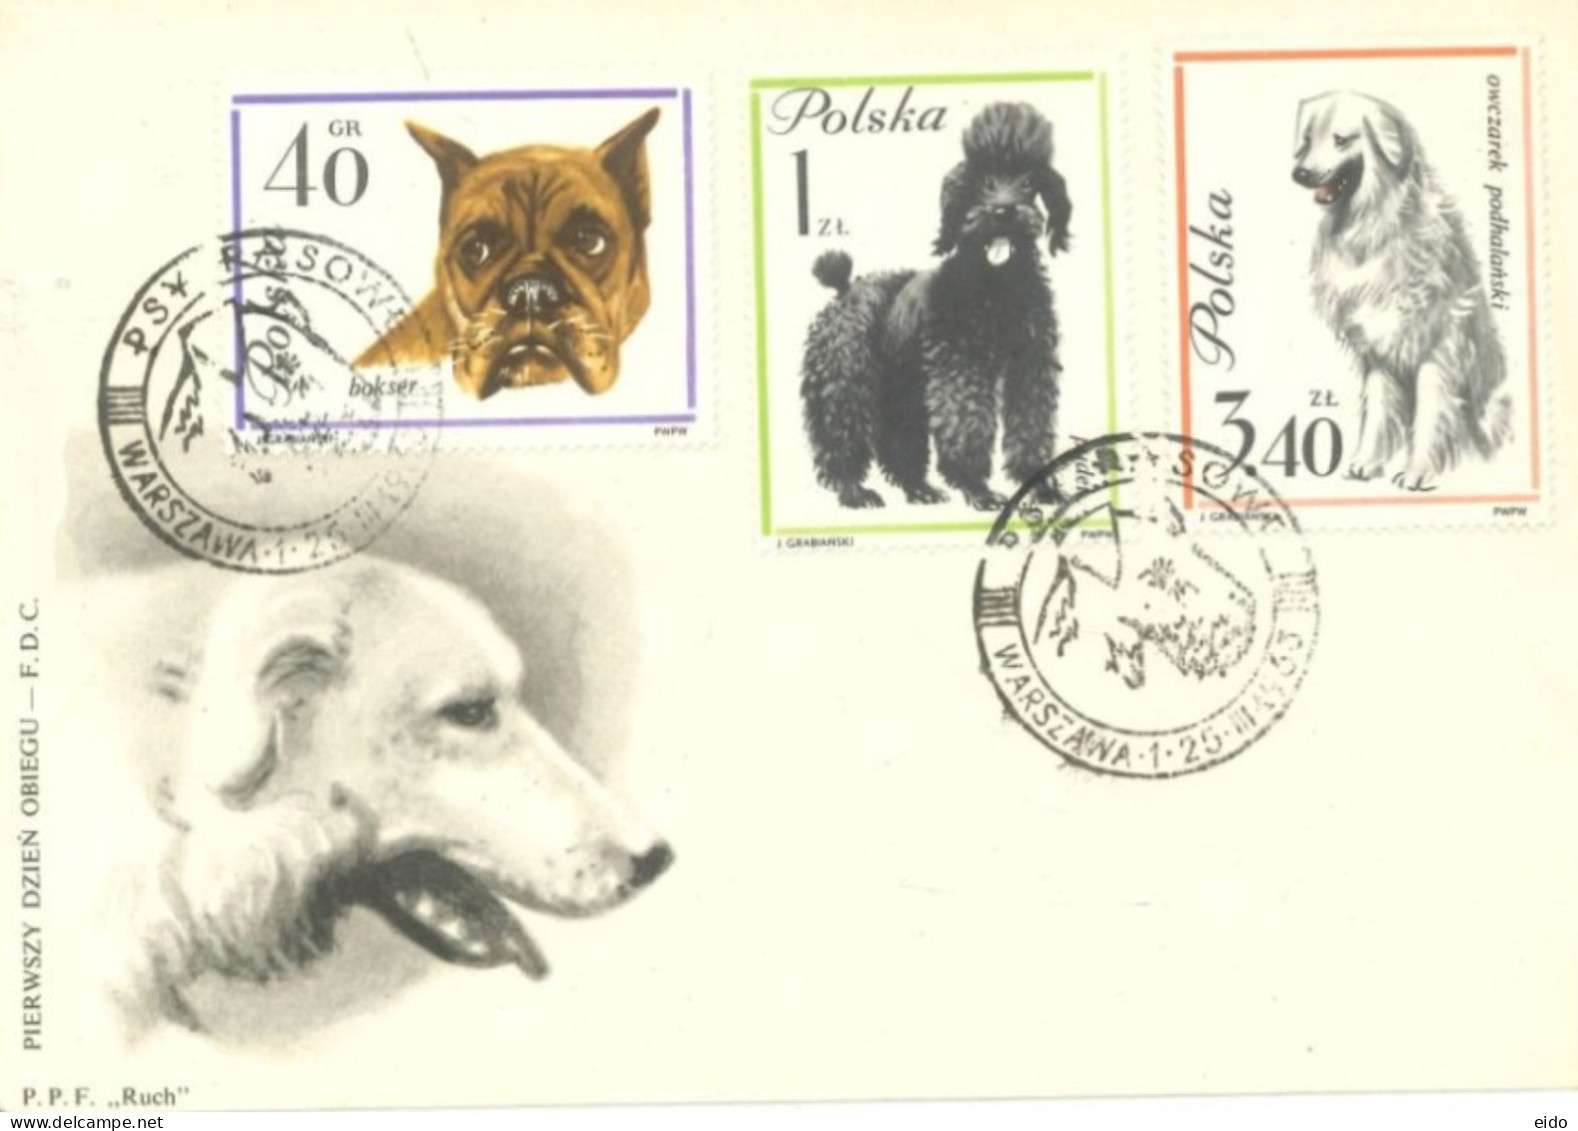 POLAND - 1963, FDC STAMPS OF DOGS TYPE,NOT USED.. - Briefe U. Dokumente